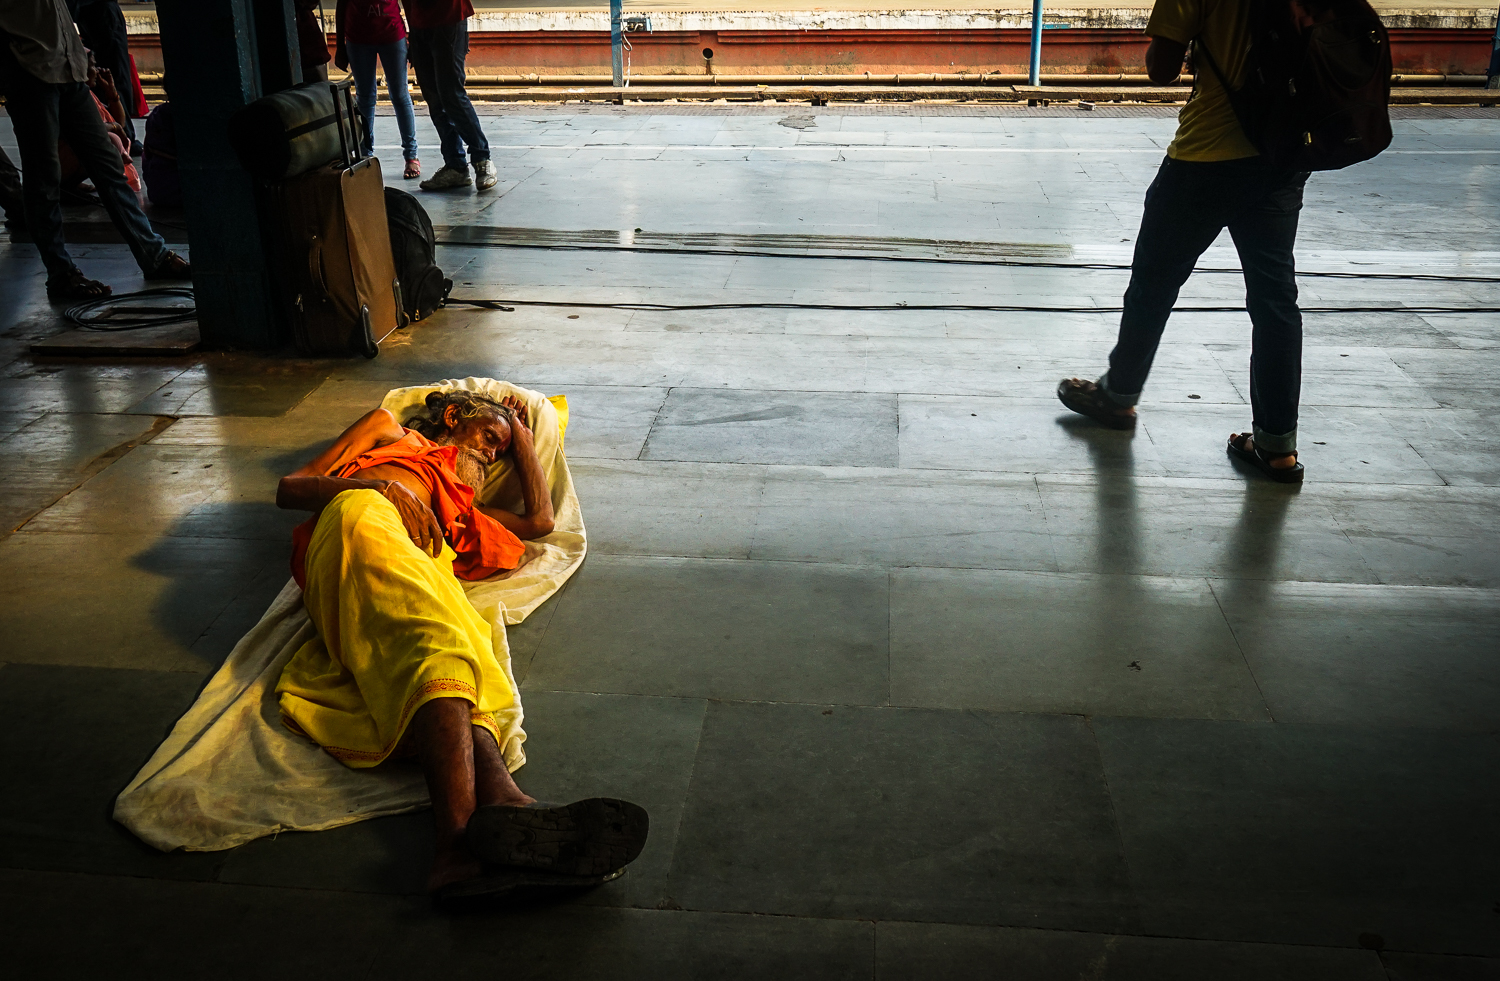 Indian Train Station